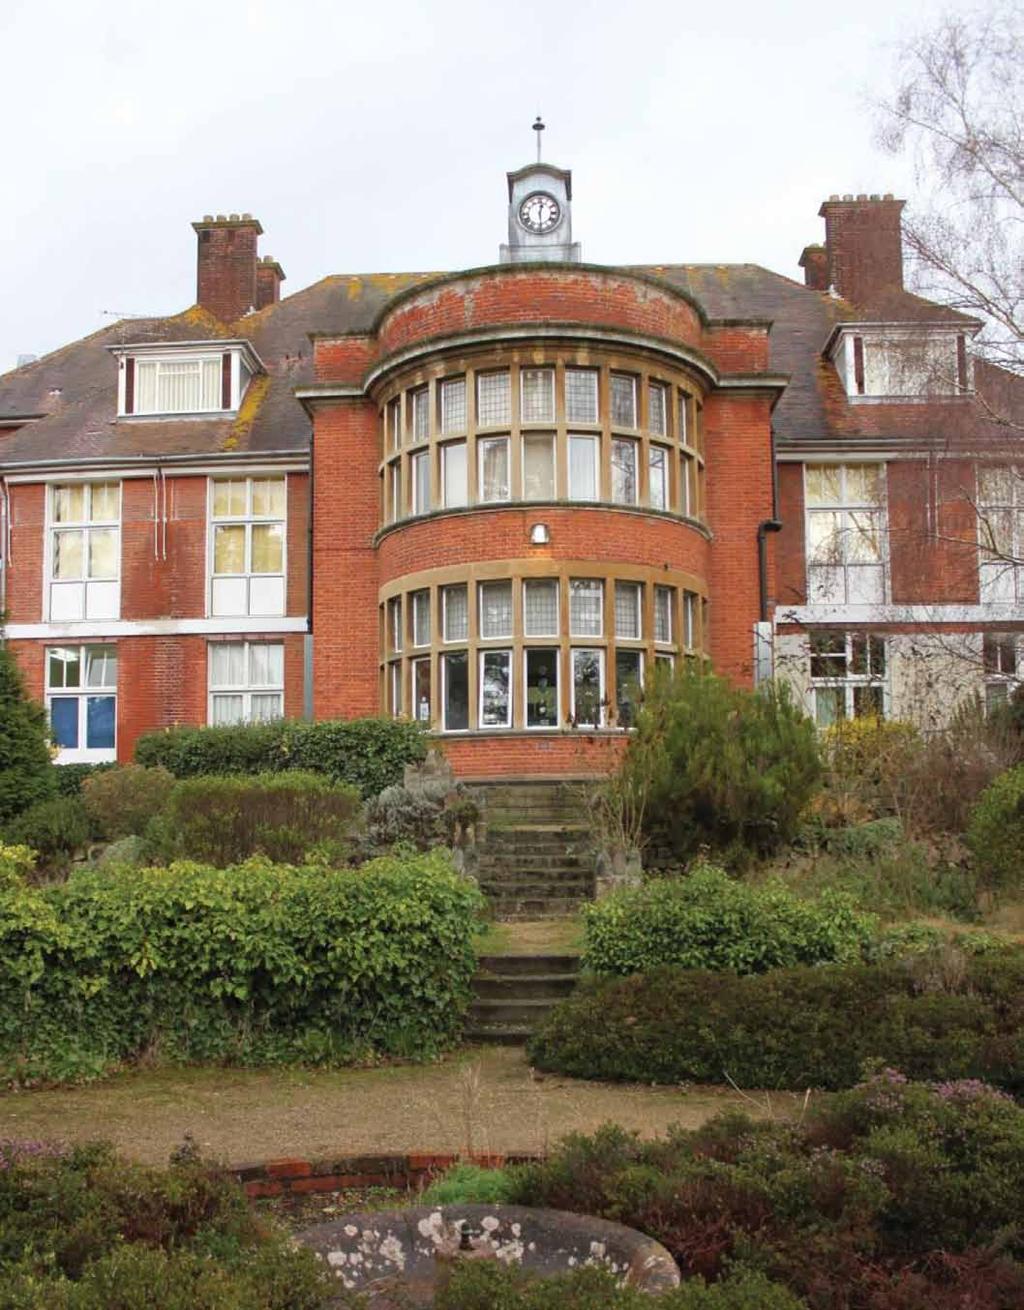 More recently, the Surrey and Borders Partnership NHS Foundation has decided to sell the Ridgewood Centre as part of its plans to improve the quality of mental health services across Surrey.